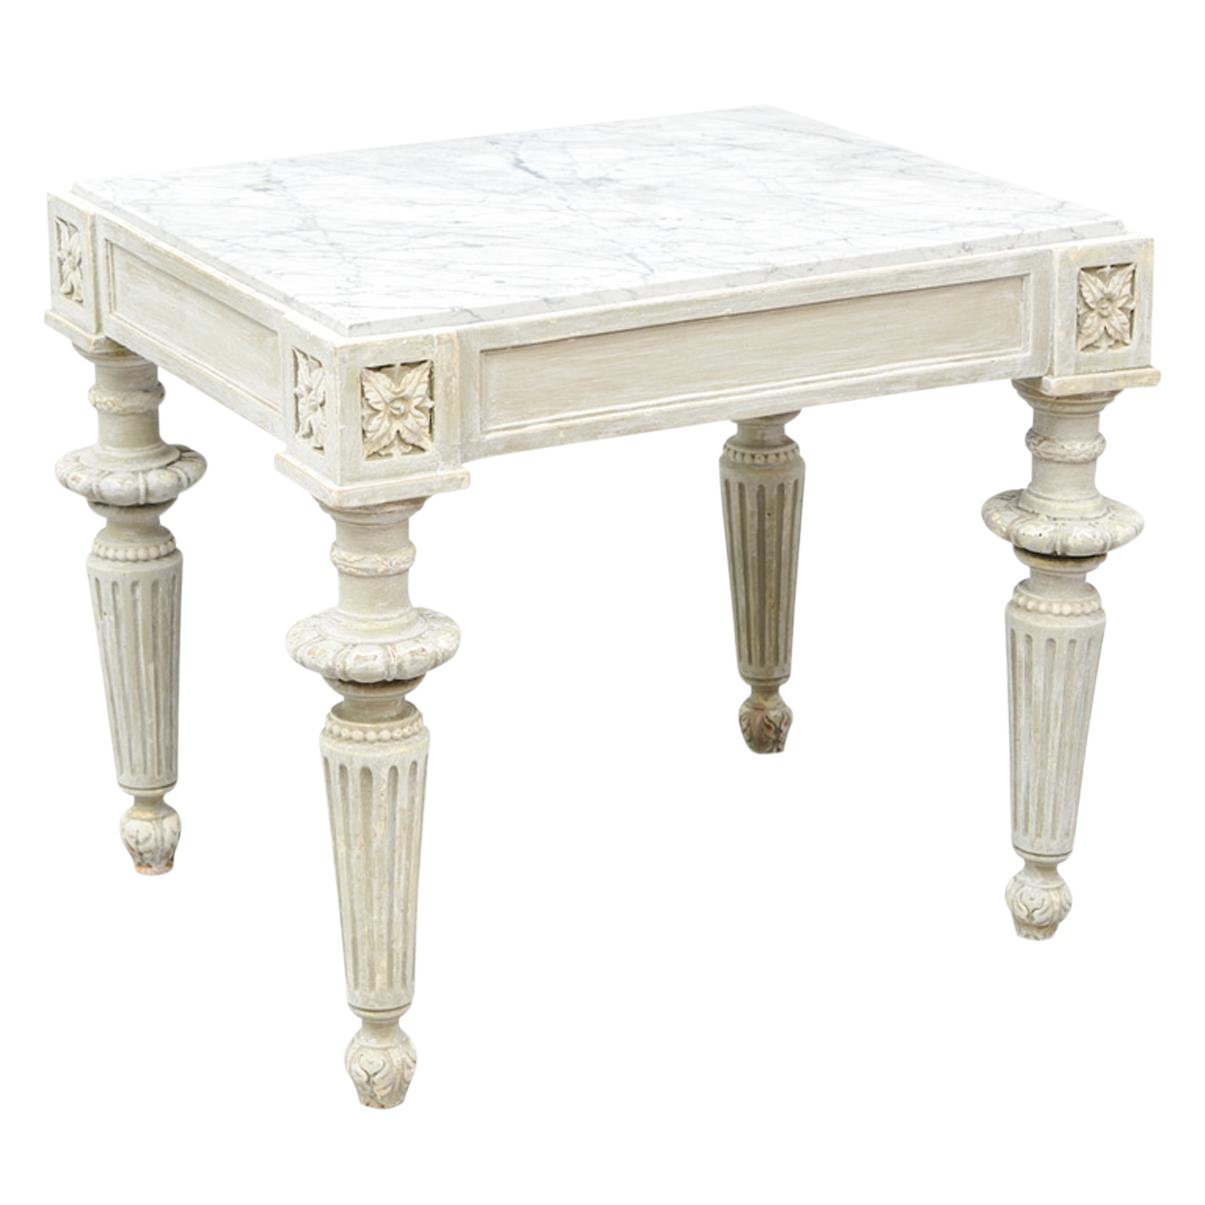 carved wood louis xvi style accent table with white marble top cardboard wooden stacking tables grey side teak cream colored nightstand foldable trestle off distressed coffee